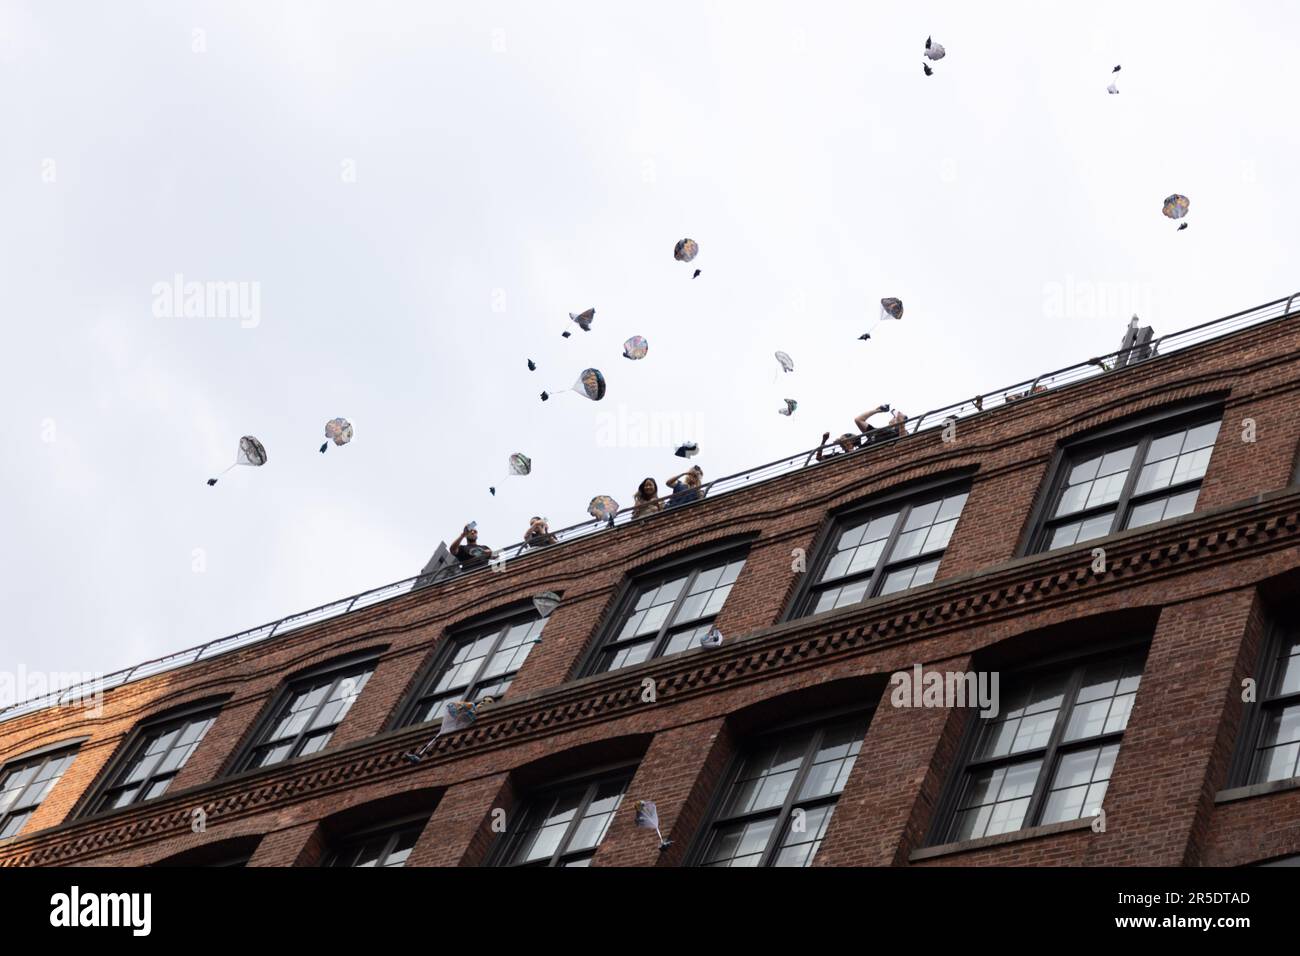 Toy elephants attached to a mini parachute are dropped from high above buildings on Washington Street in the Dumbo neighborhood of Brooklyn. The event is part of New York City's summer festivities calendar where it promotes the Dumbo neighborhood of Brooklyn. June 2, 2023 (Photo: Vanessa Carvalho) Credit: Brazil Photo Press/Alamy Live News Stock Photo